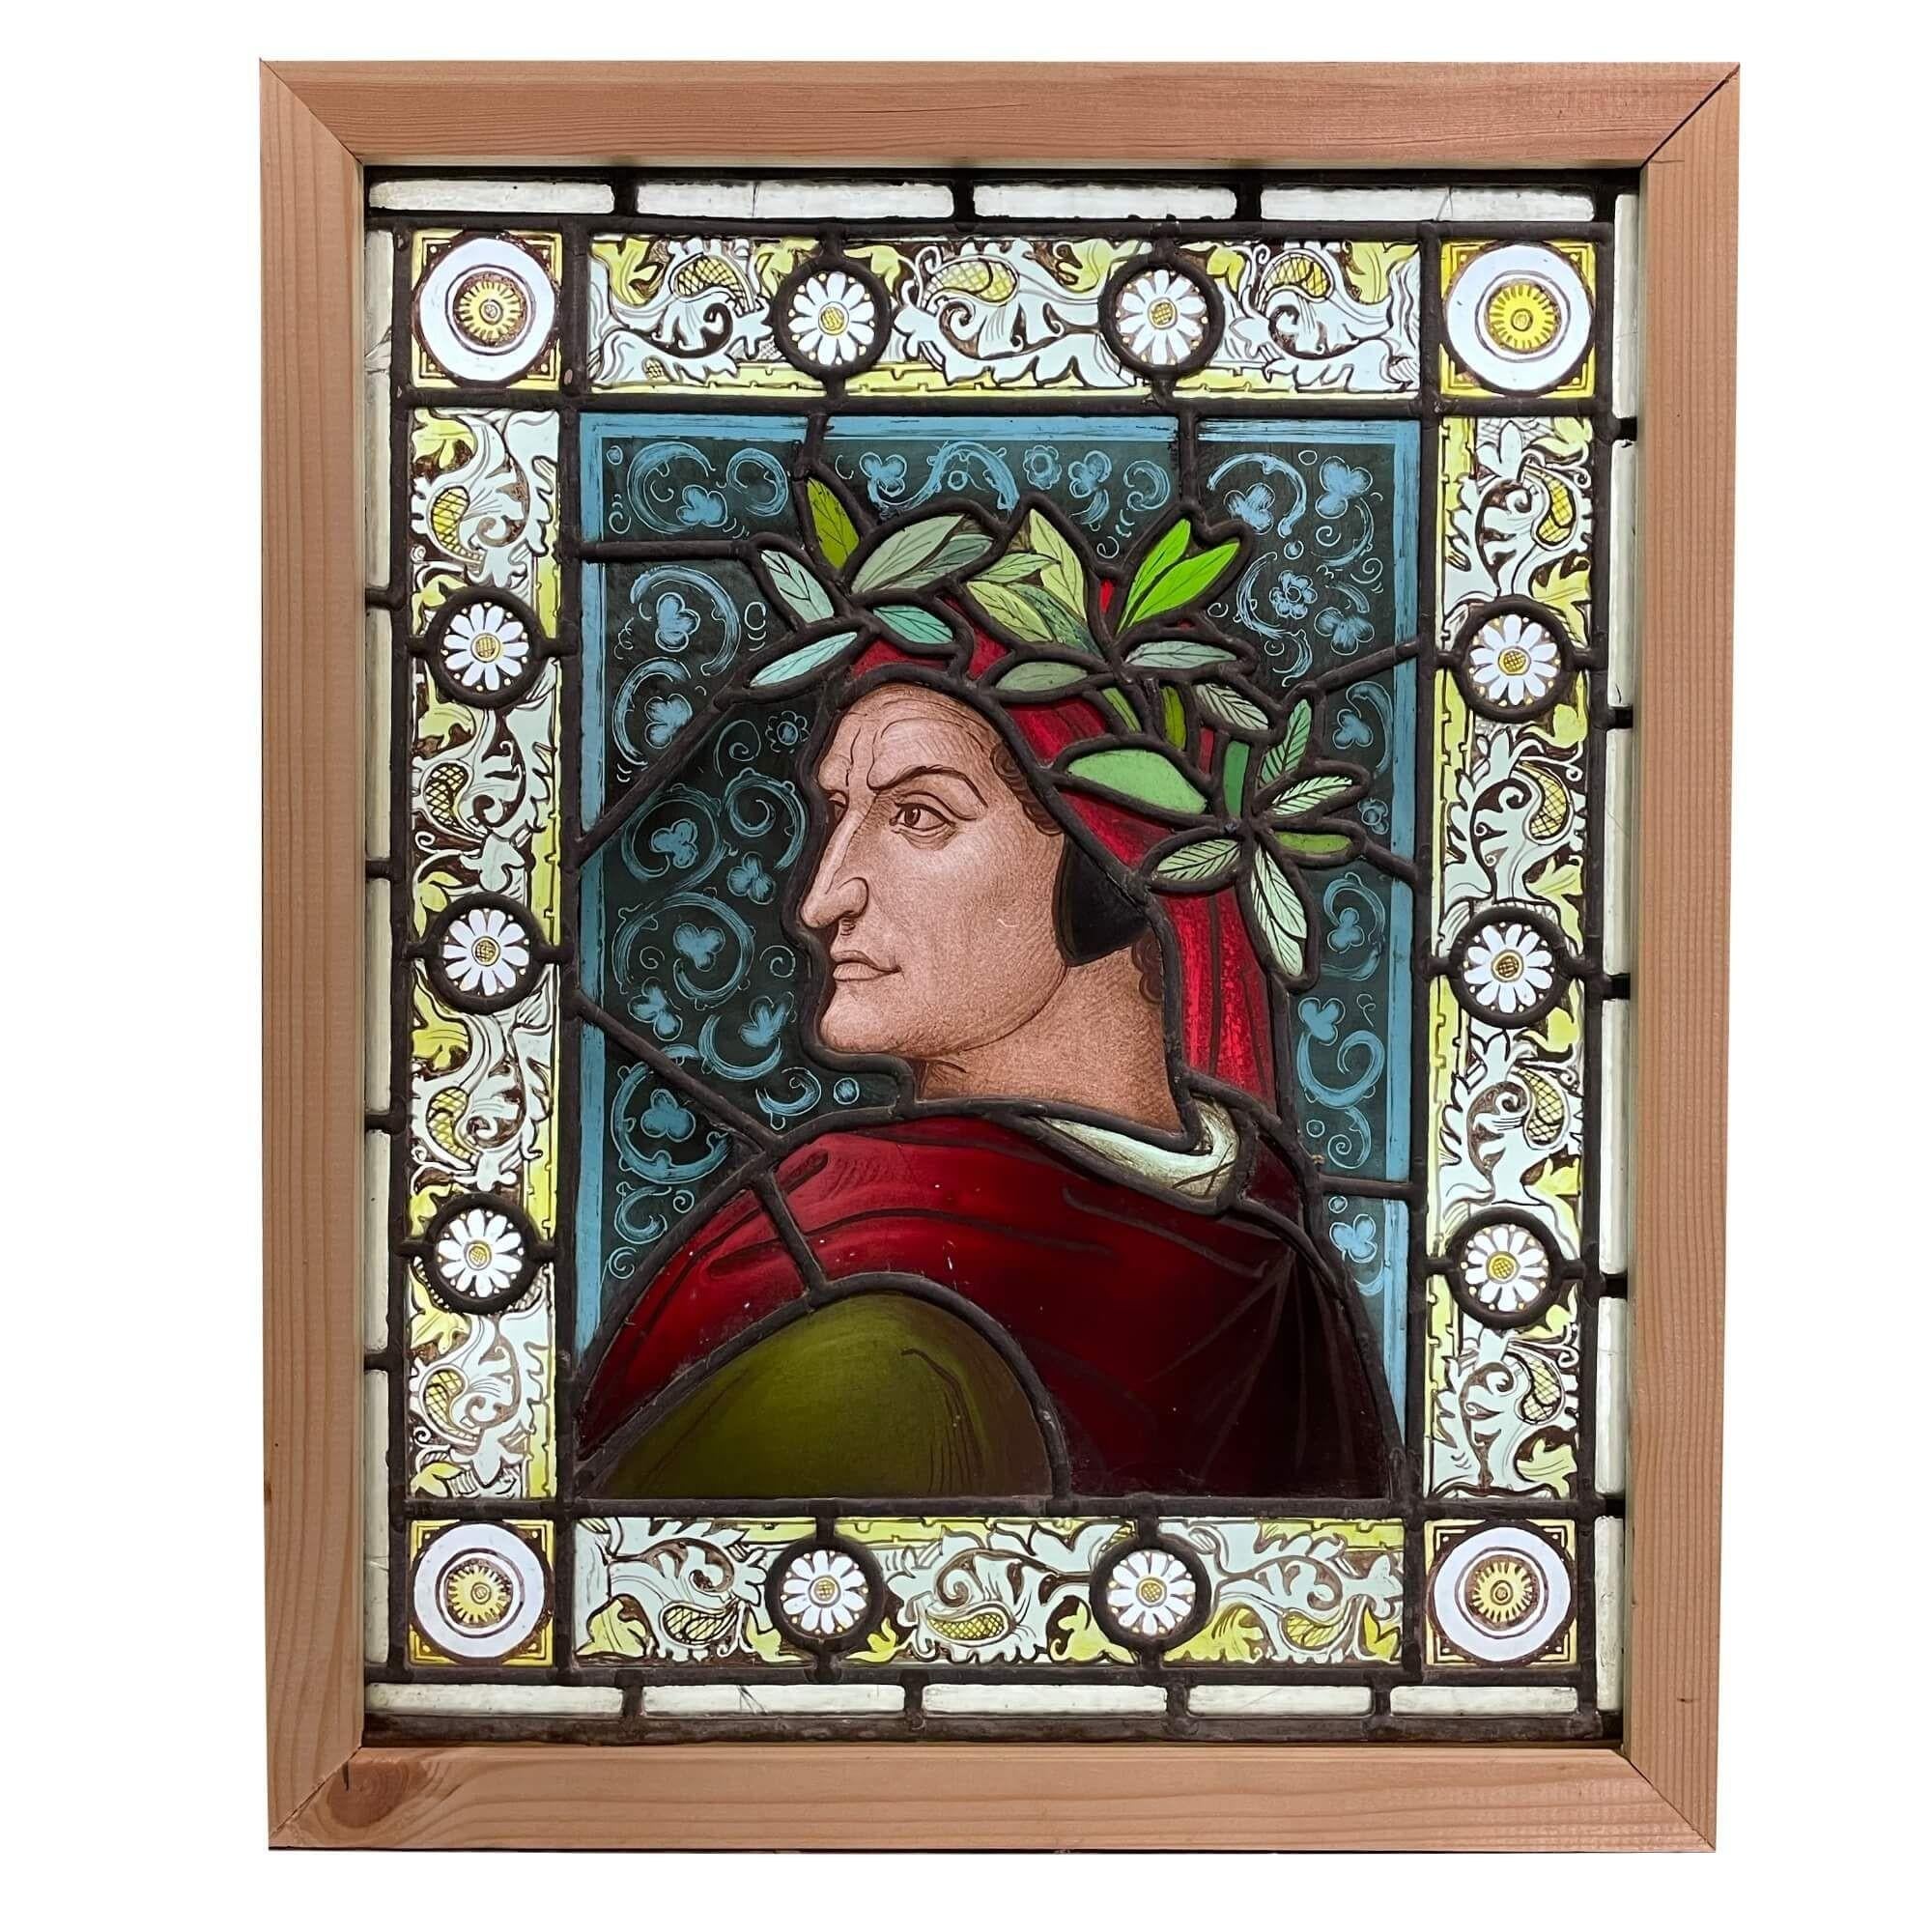 Antique Stained Glass Window Depicting Dante In Fair Condition For Sale In Wormelow, Herefordshire